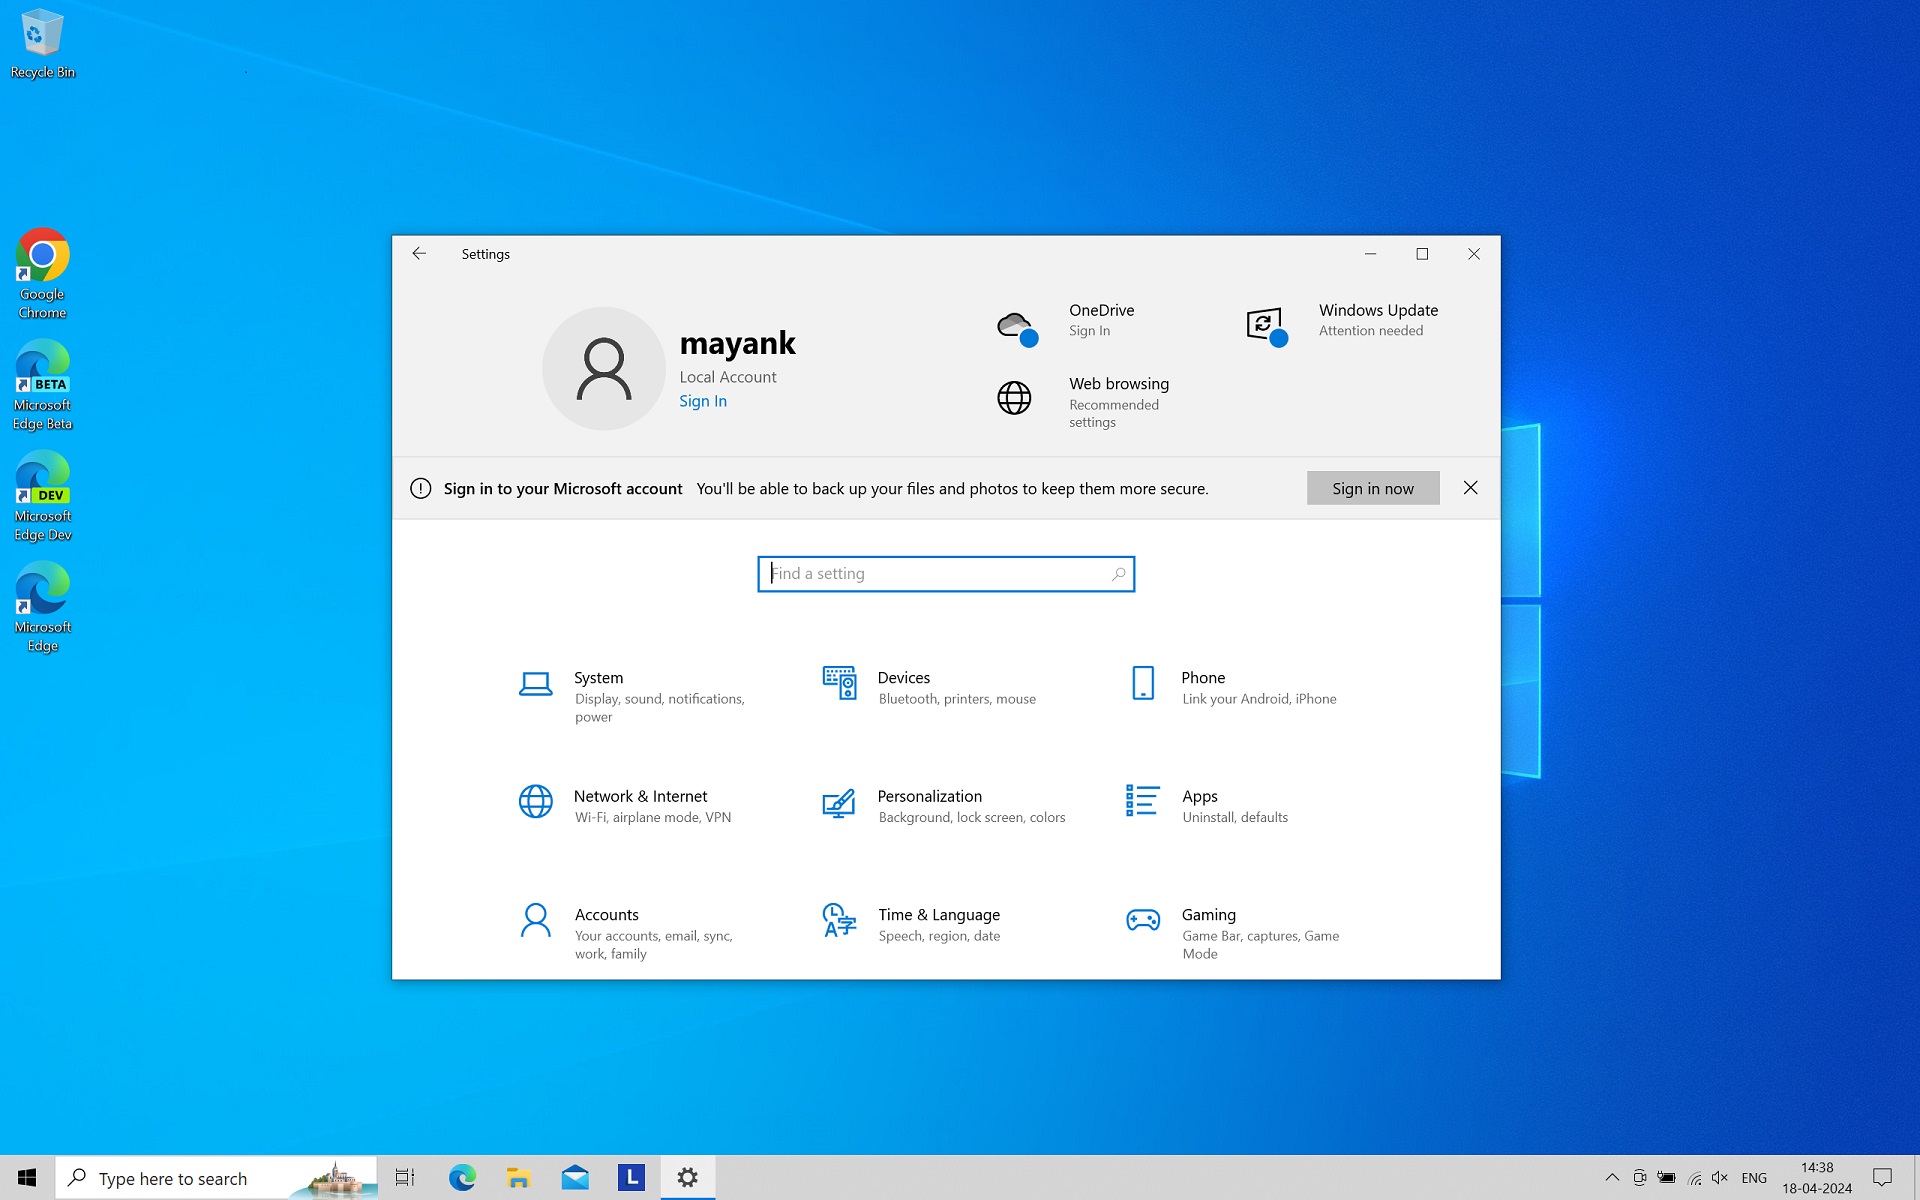 Windows-10-sign-in-to-your-Microsoft-account-pop-up.jpg